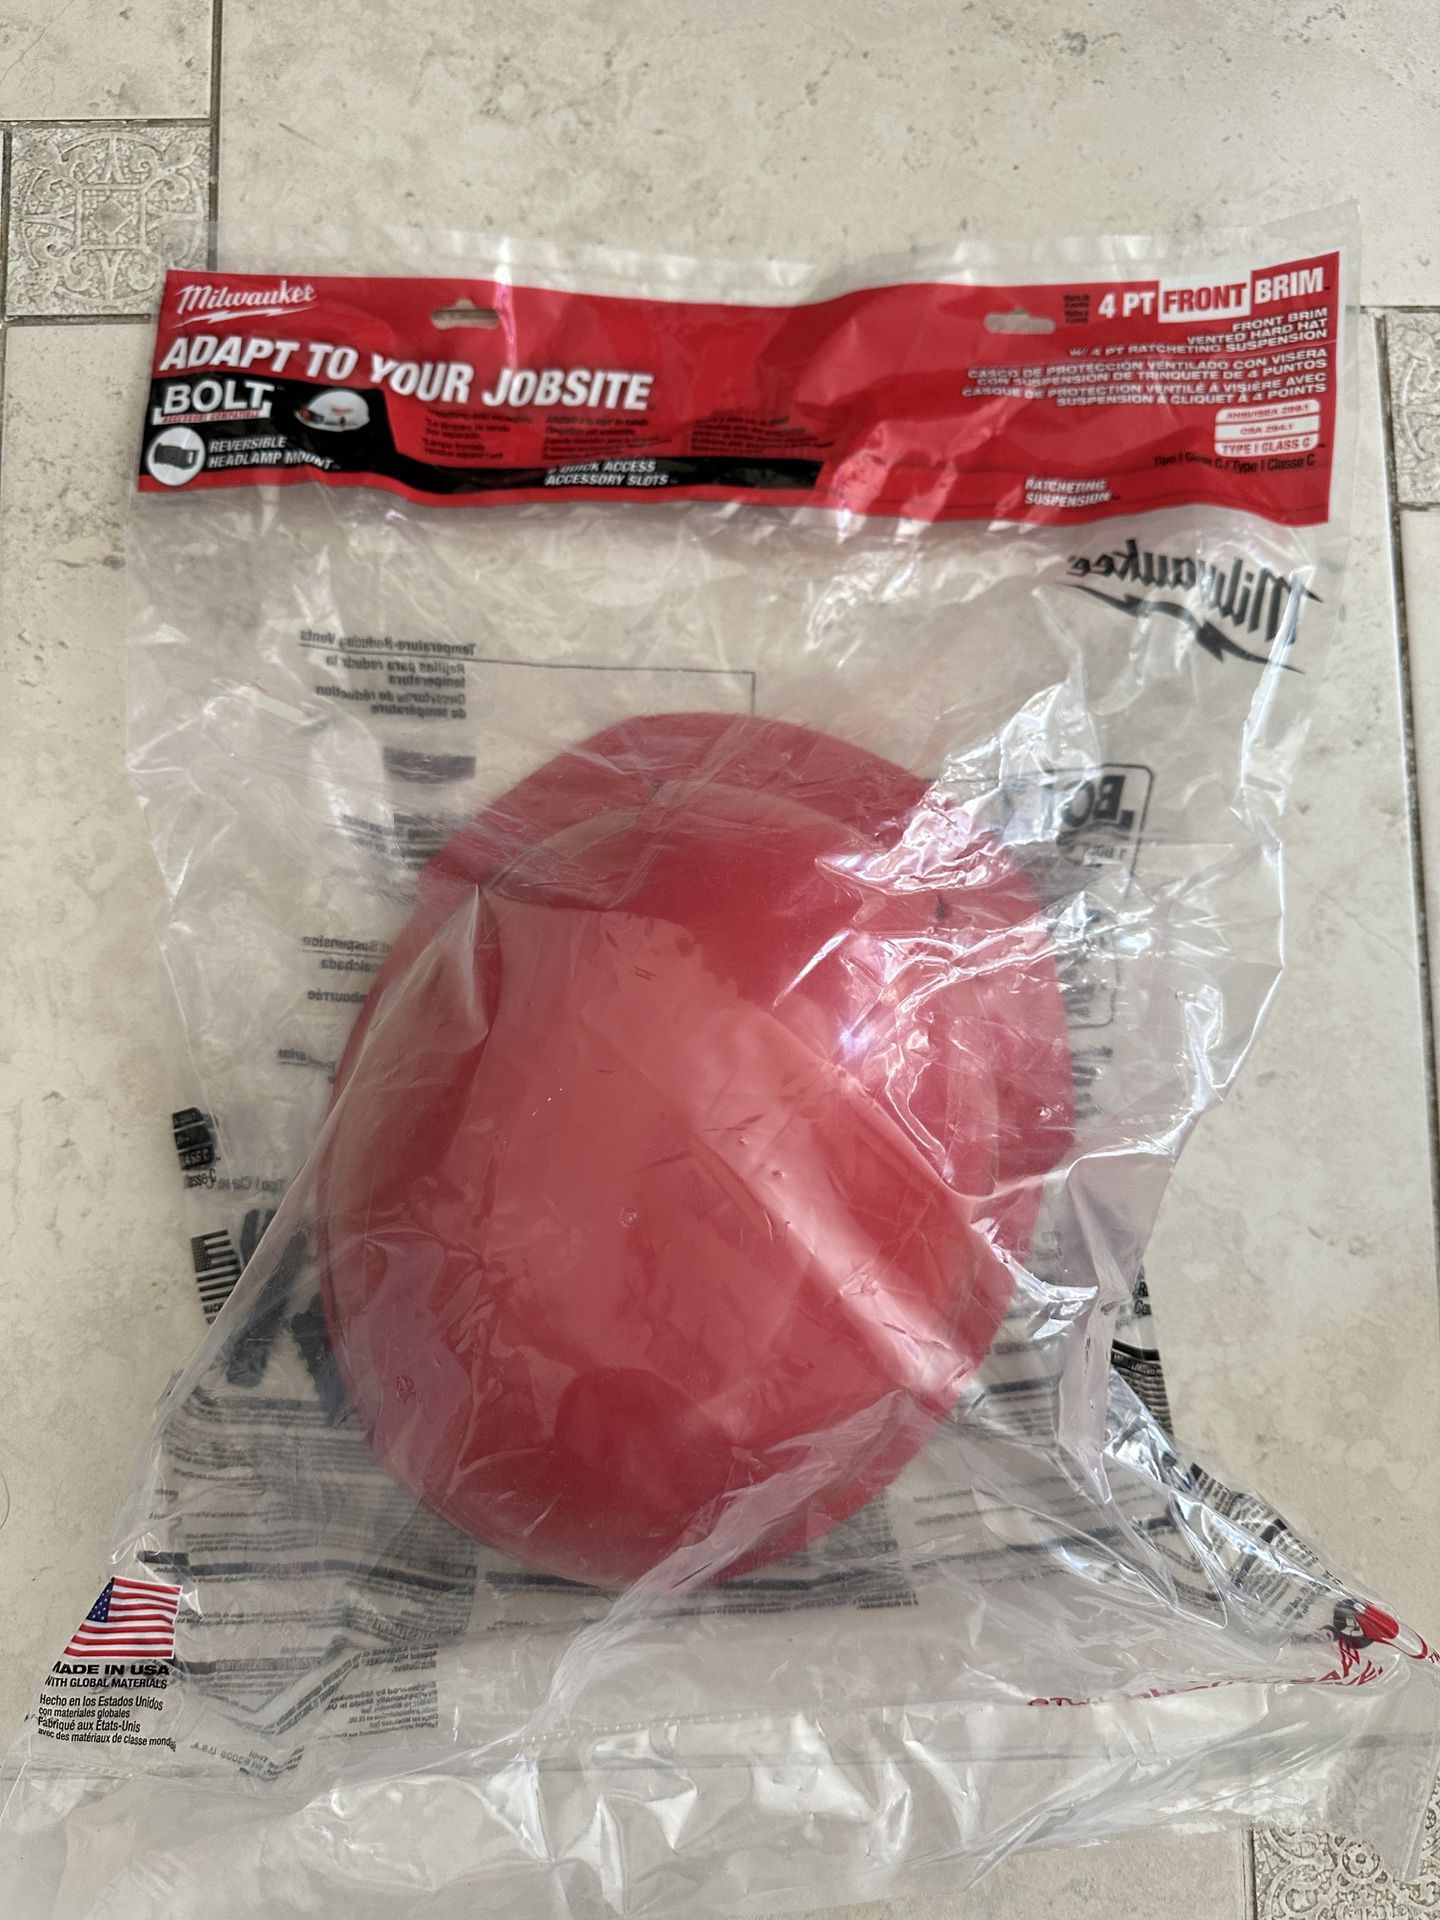 Milwaukee 48-73-1208 Red Front Brim Vented Hard Hat w/4pt Ratcheting Suspension - Type 1, Class C New Adapt to your jobsite Includes a BOLT headlamp m